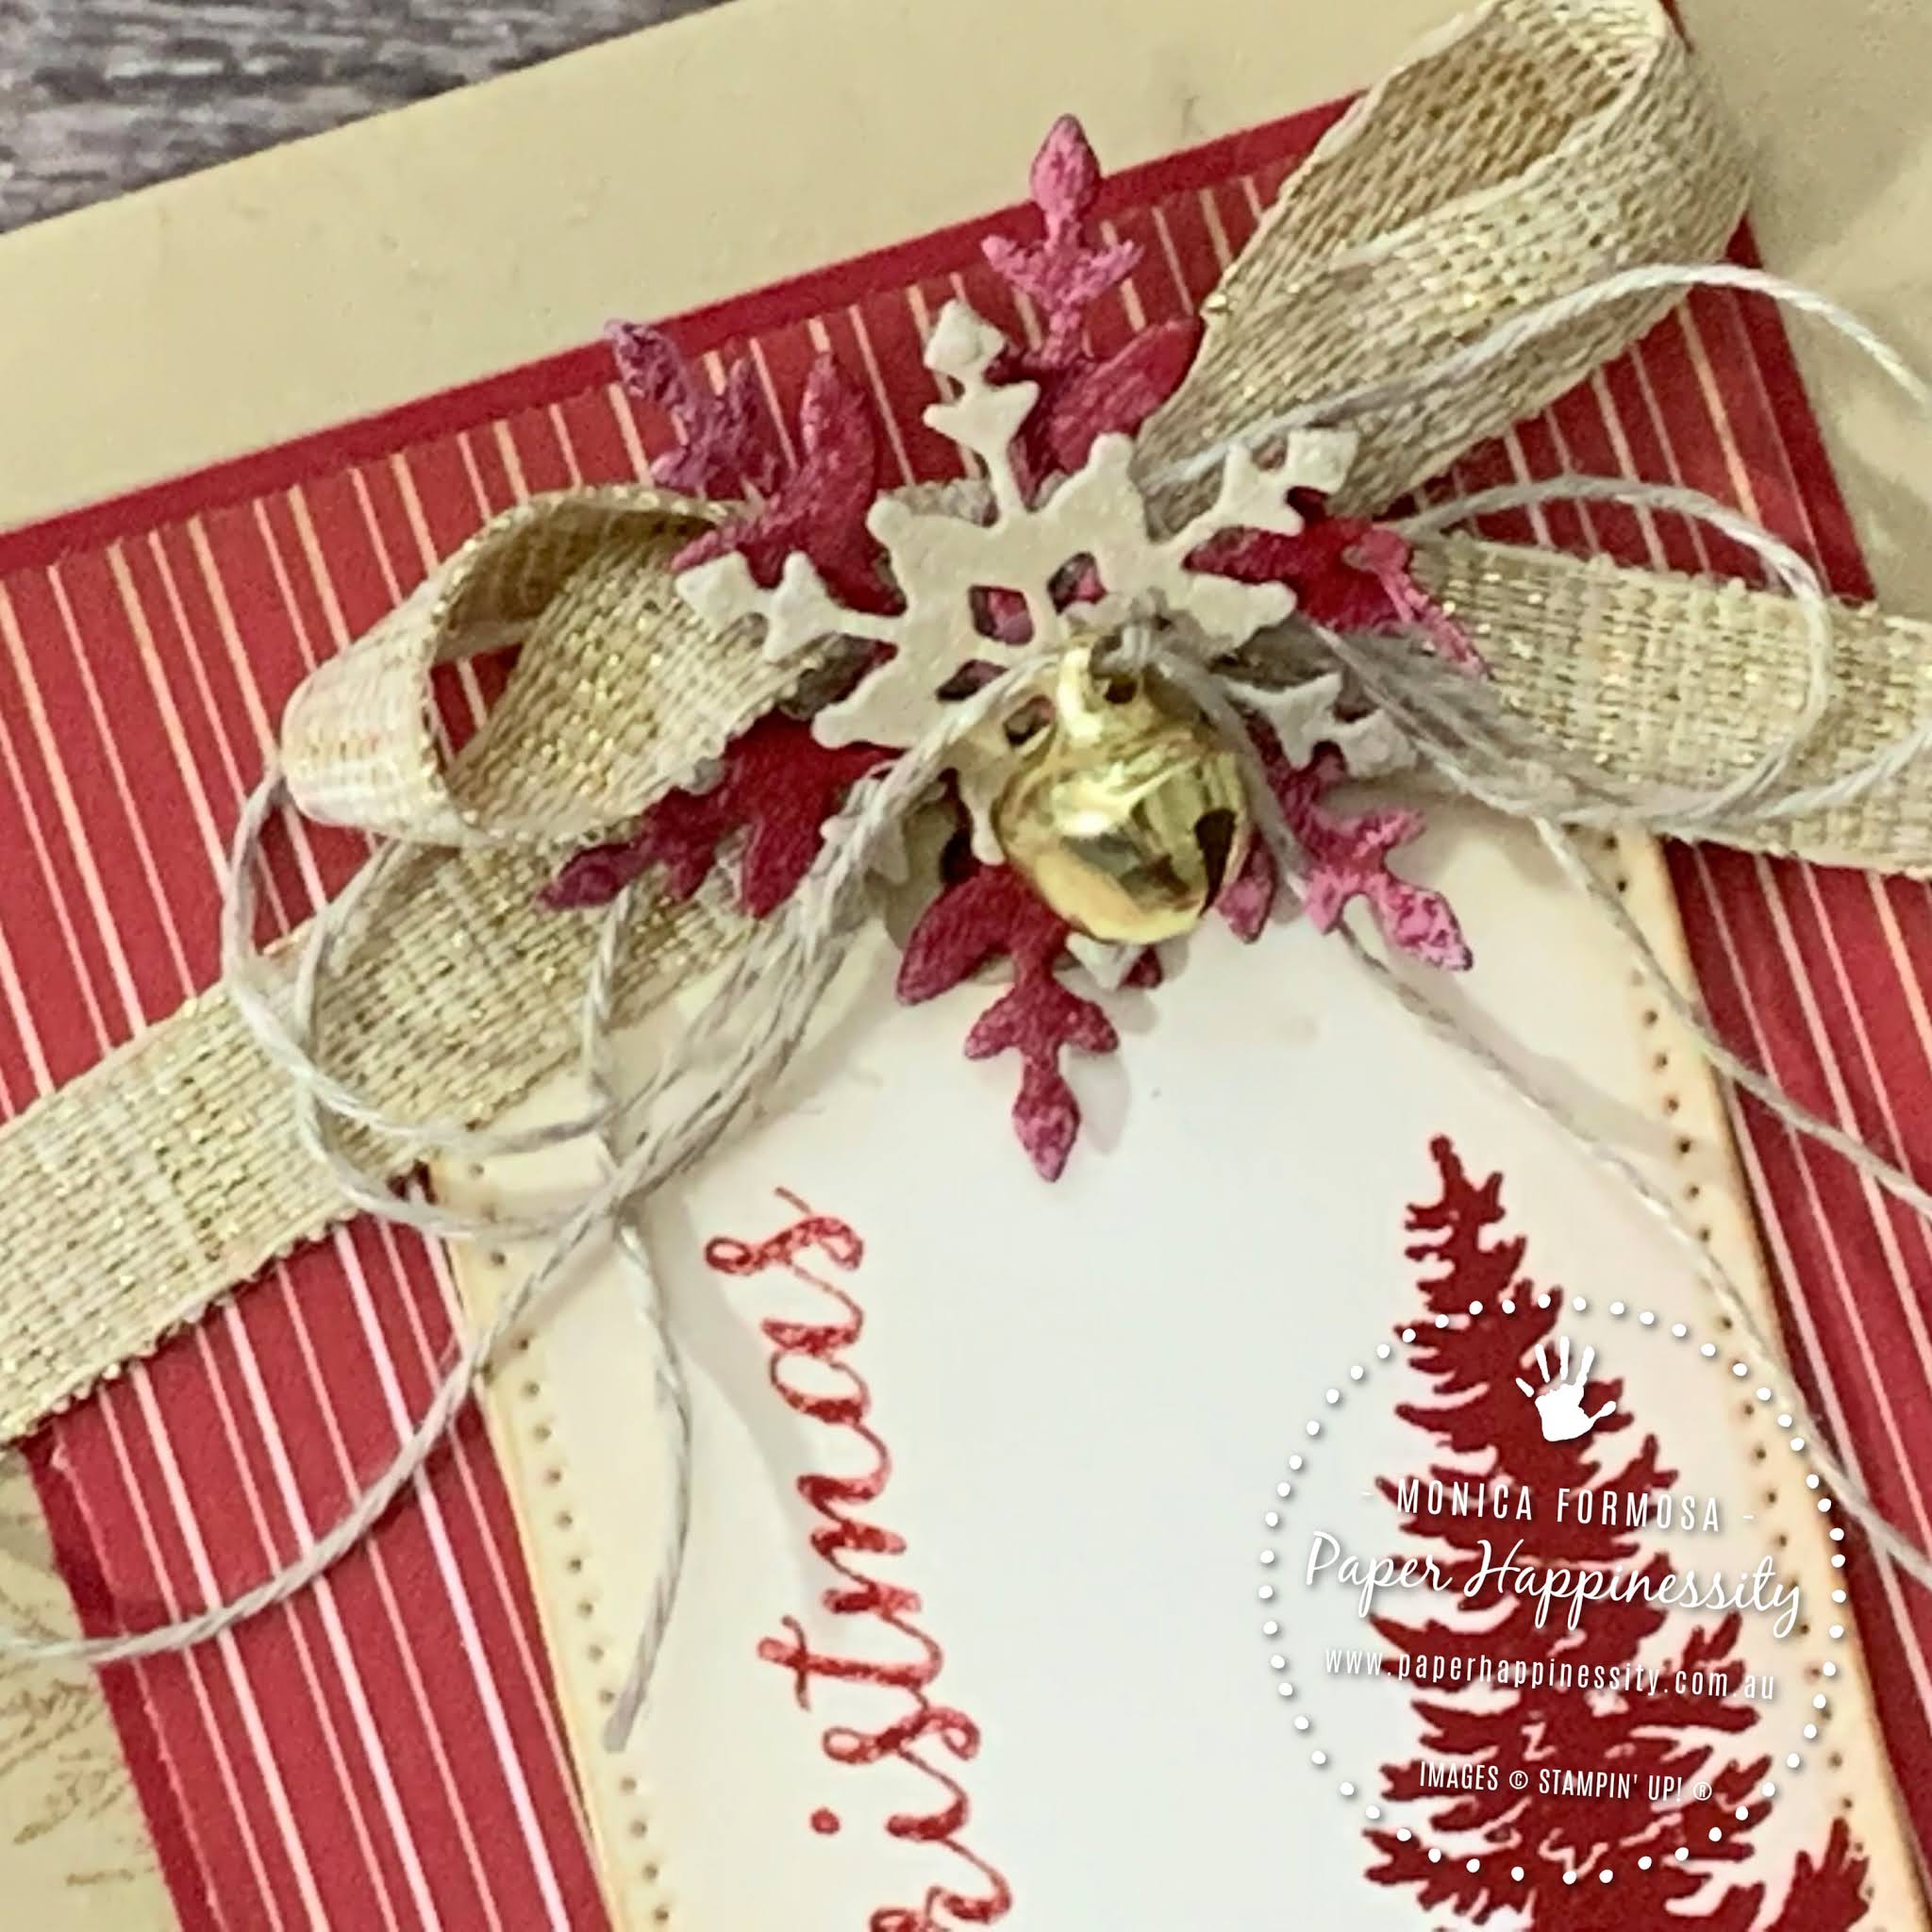 Paper Happinessity with Monica Formosa: Vintage Christmas